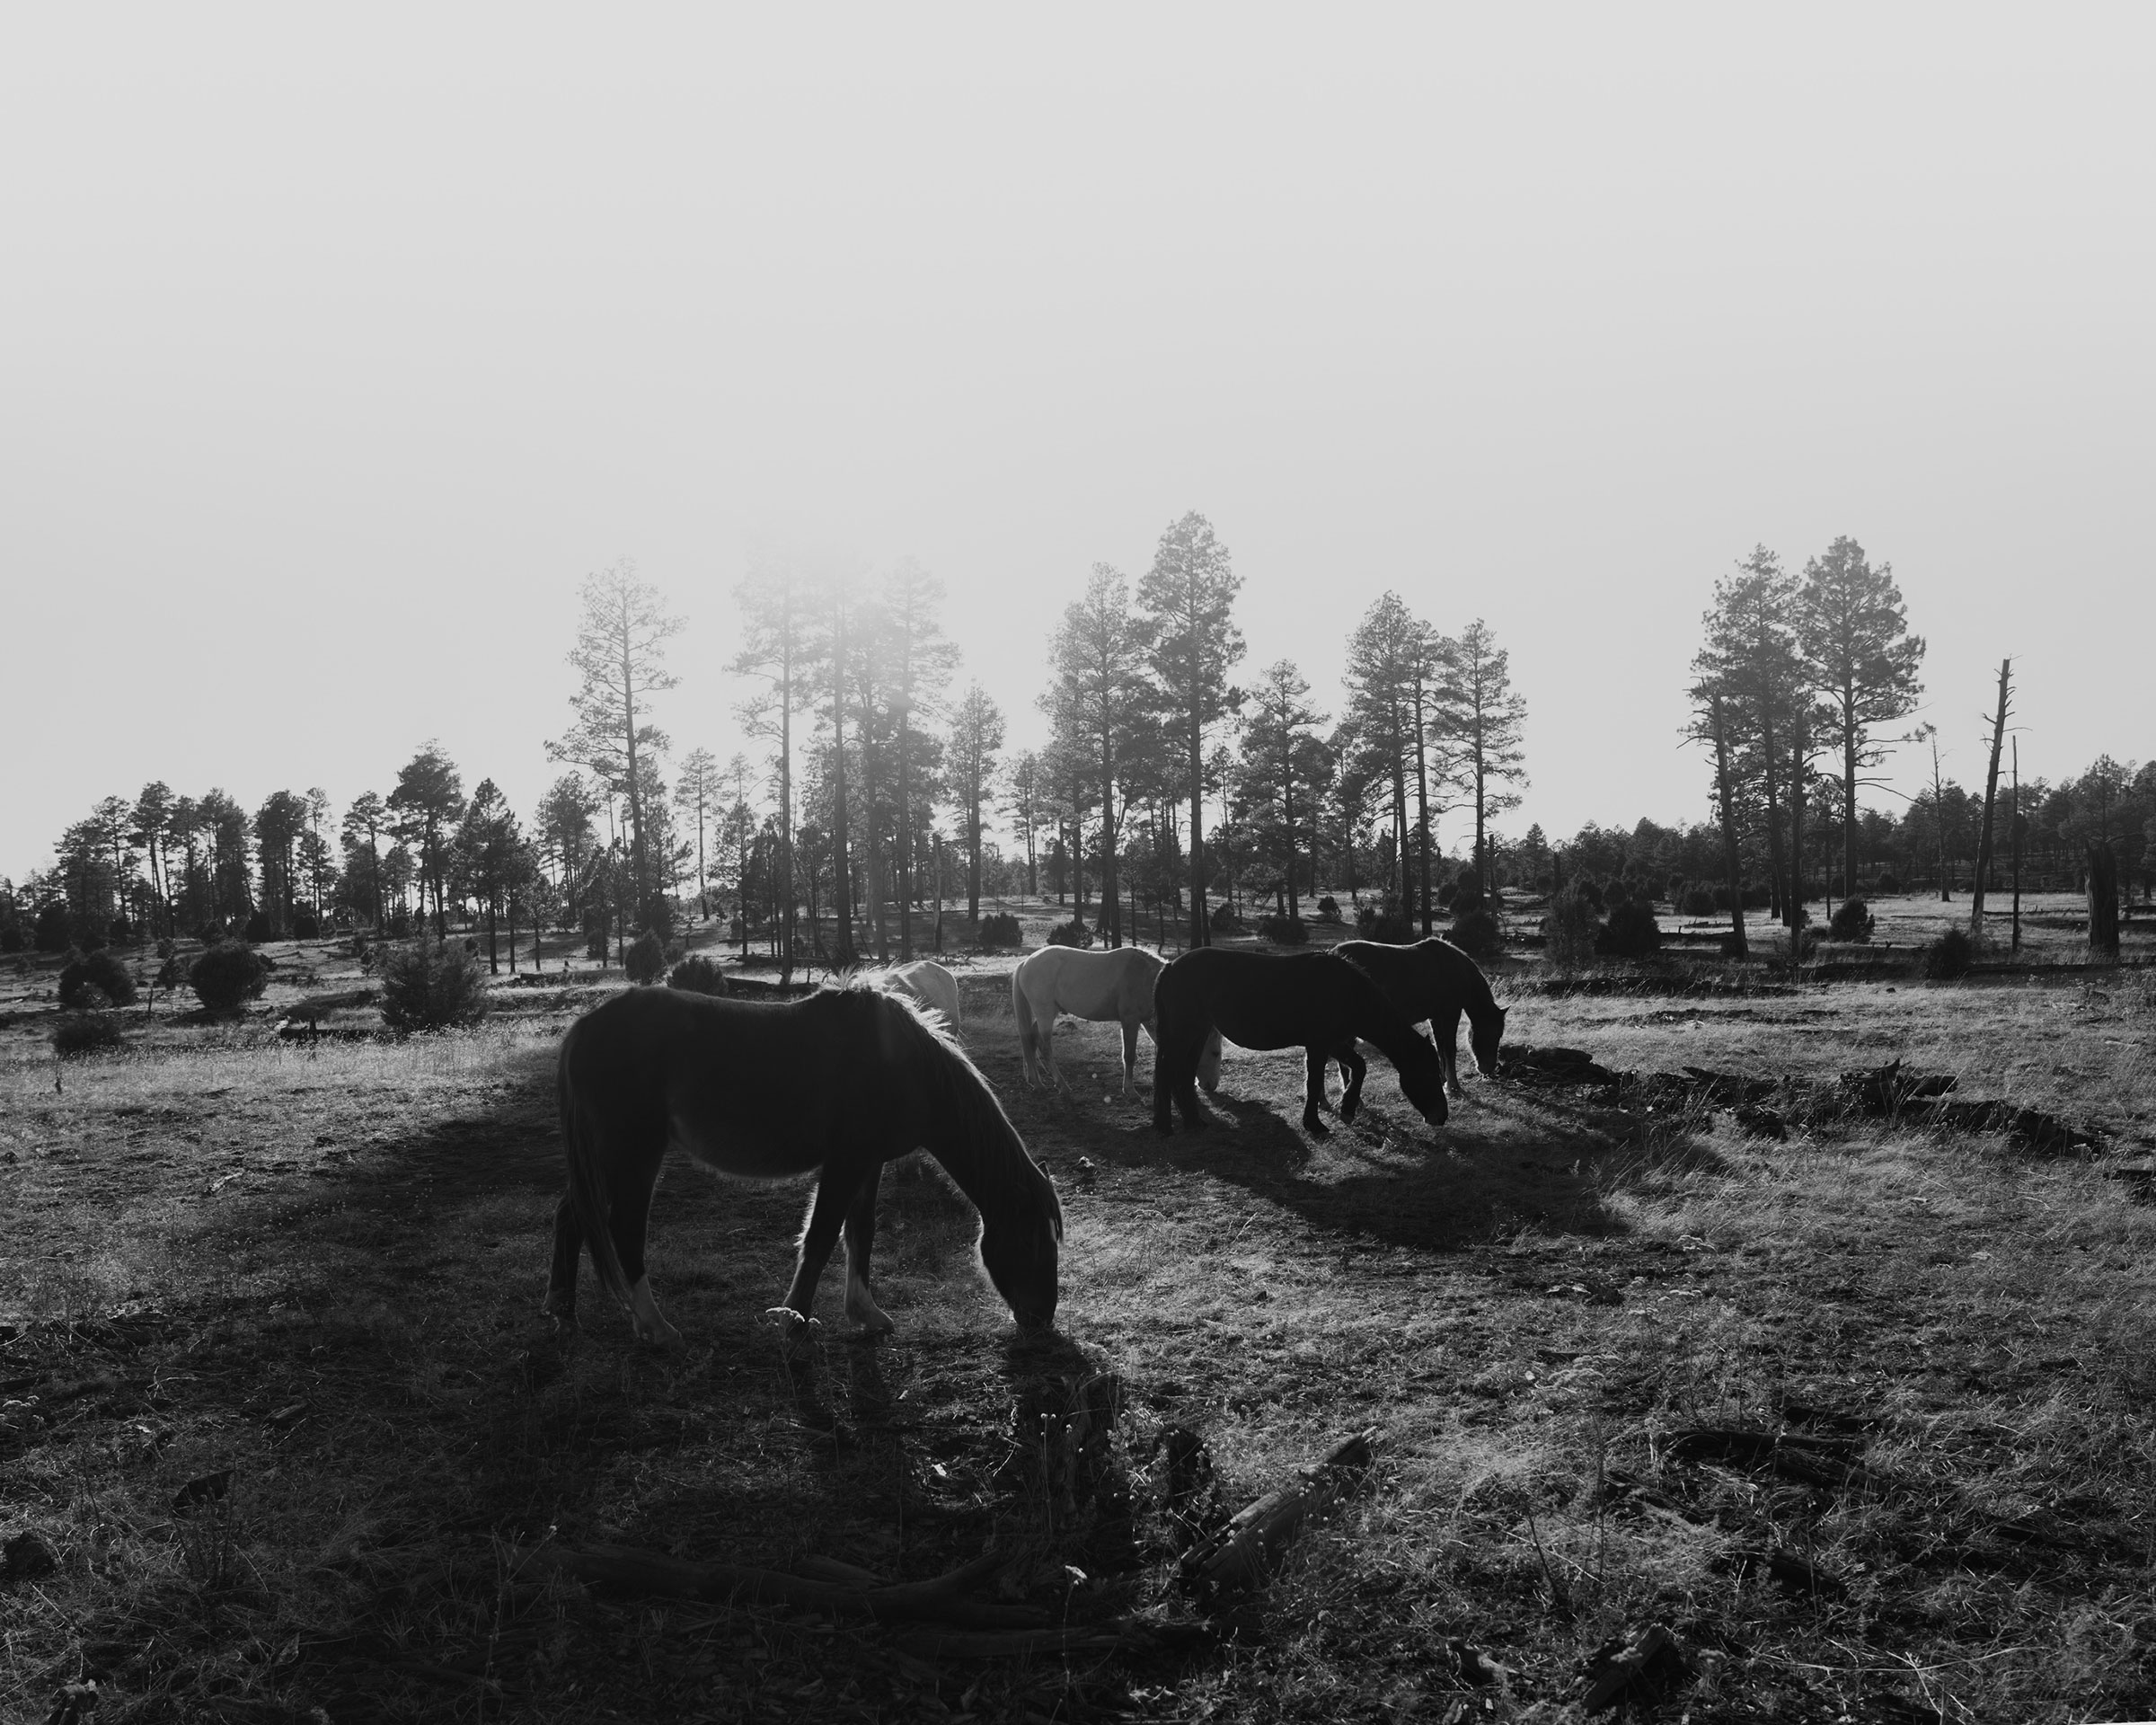 Wild horses graze in the Apache-Sitgreaves National Forests (Bryan Schutmaat for TIME)